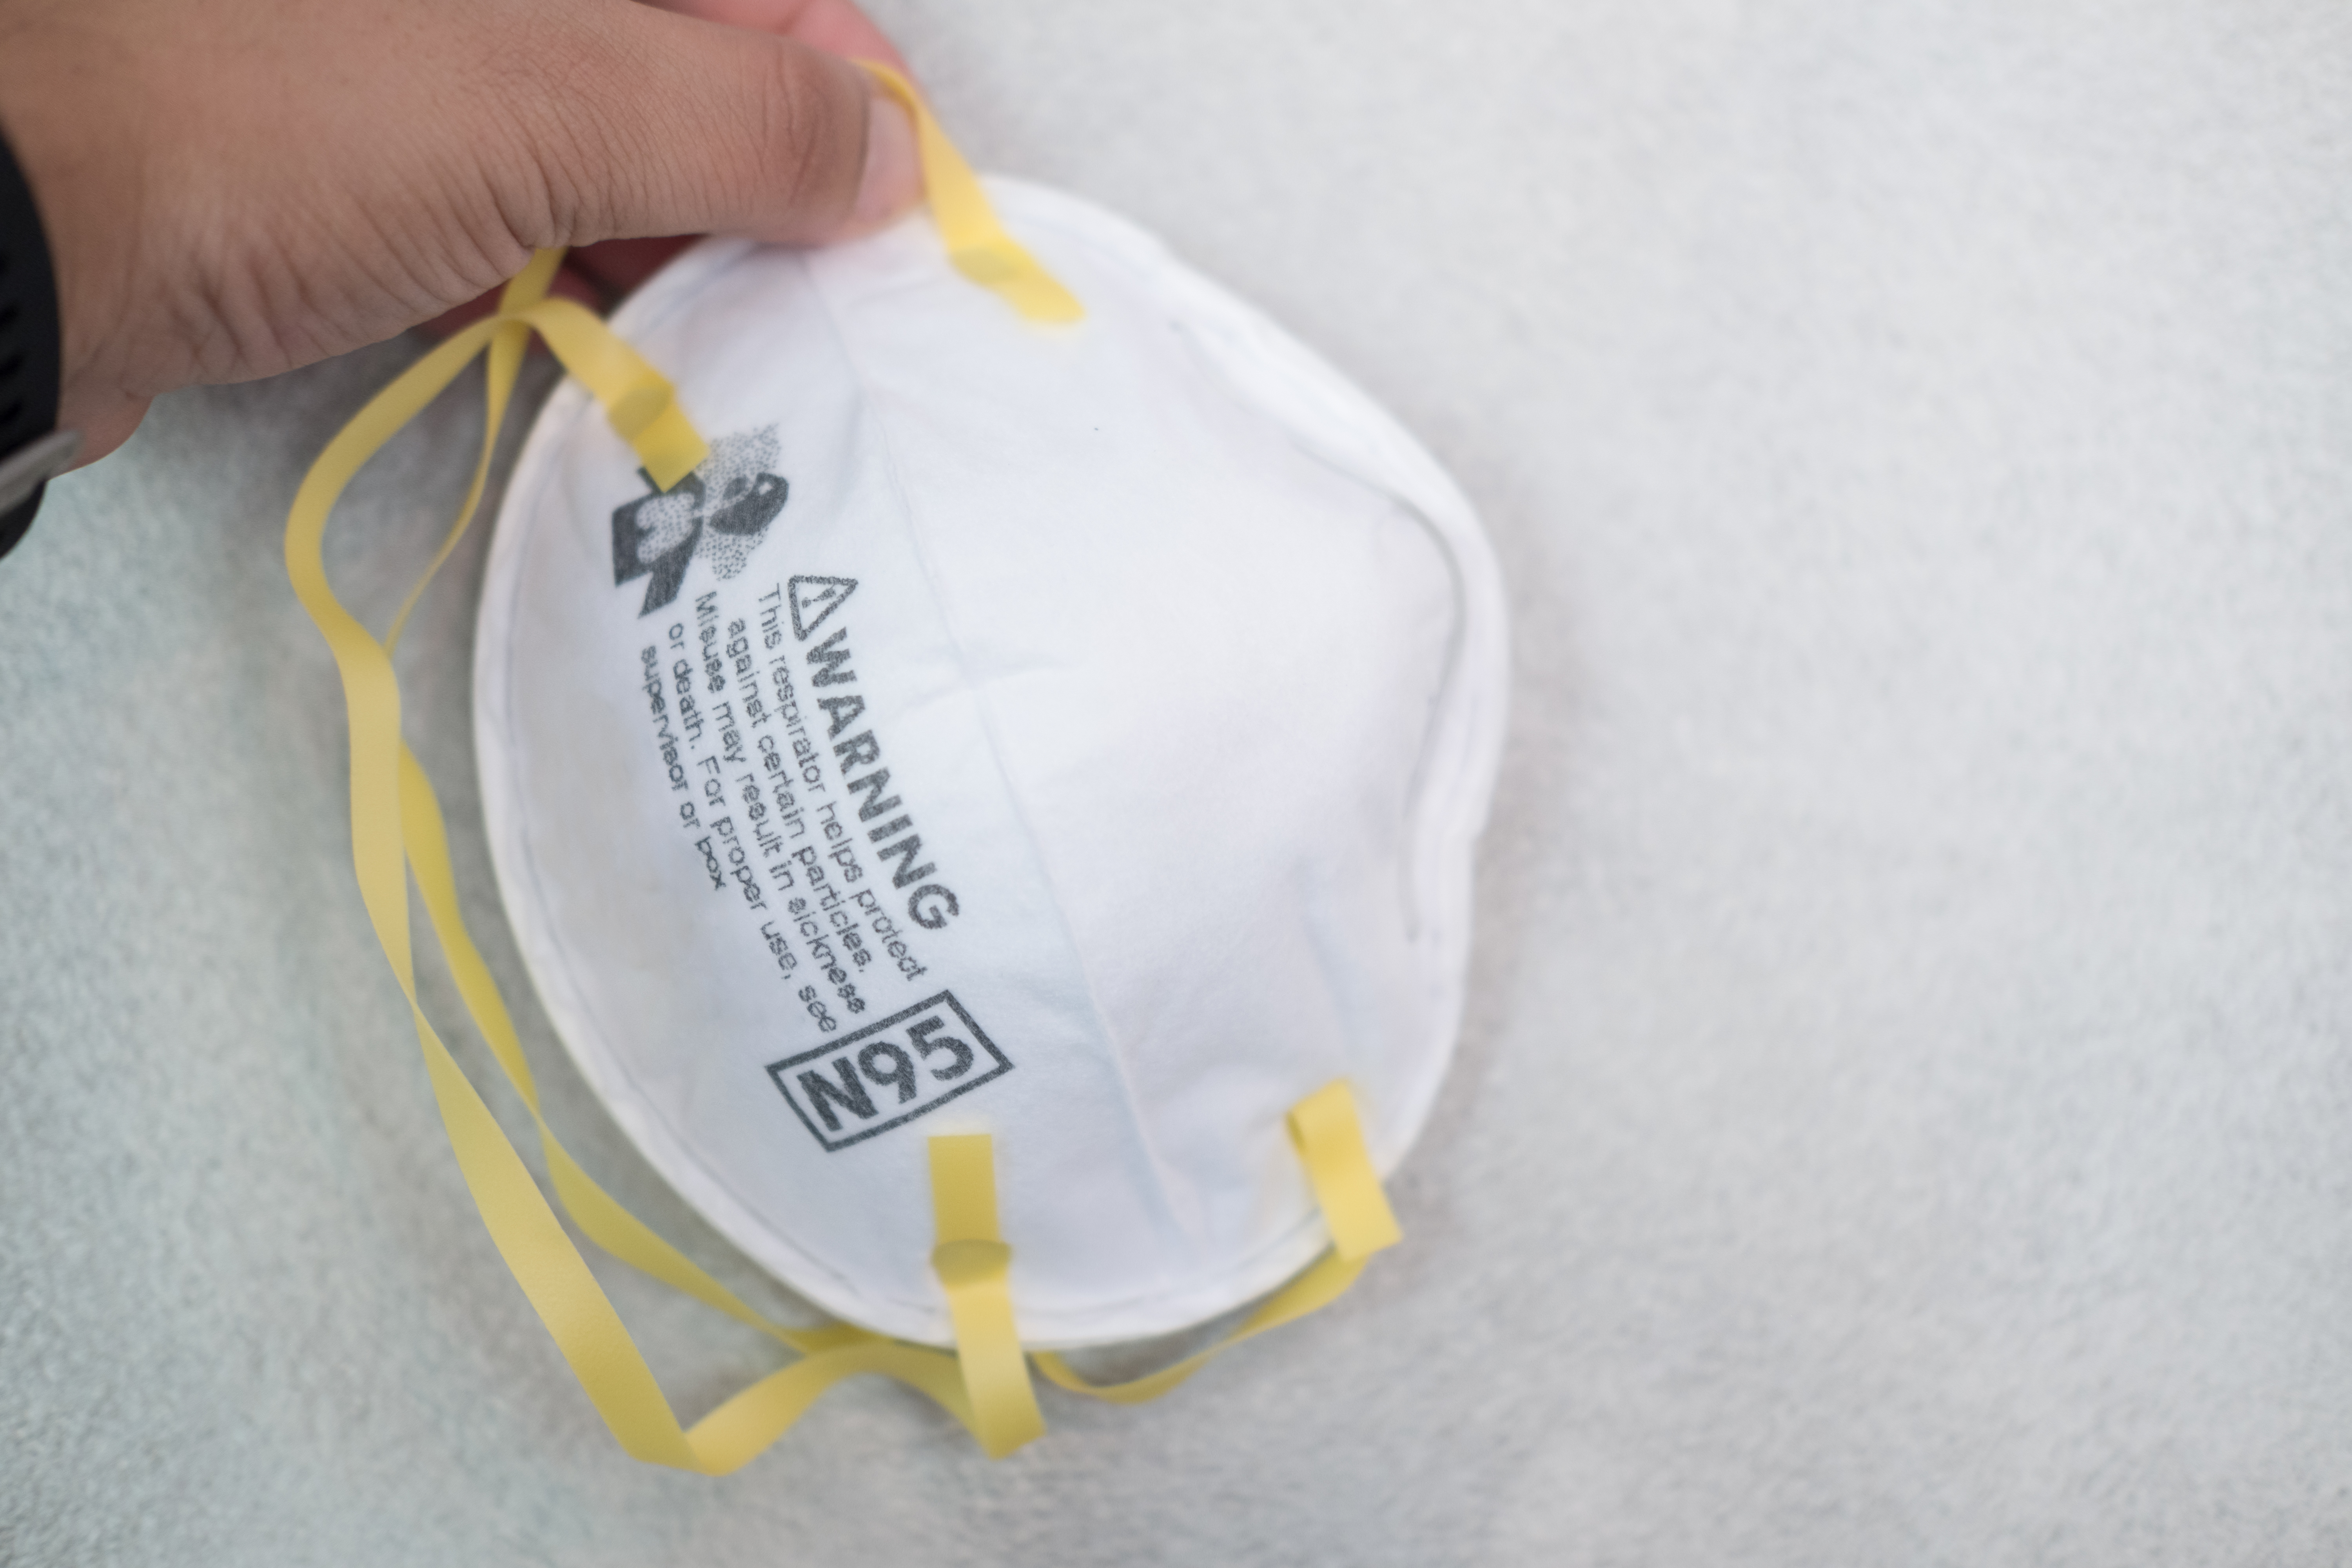 Manila exec laments soaring price of N95 face masks | Inquirer News